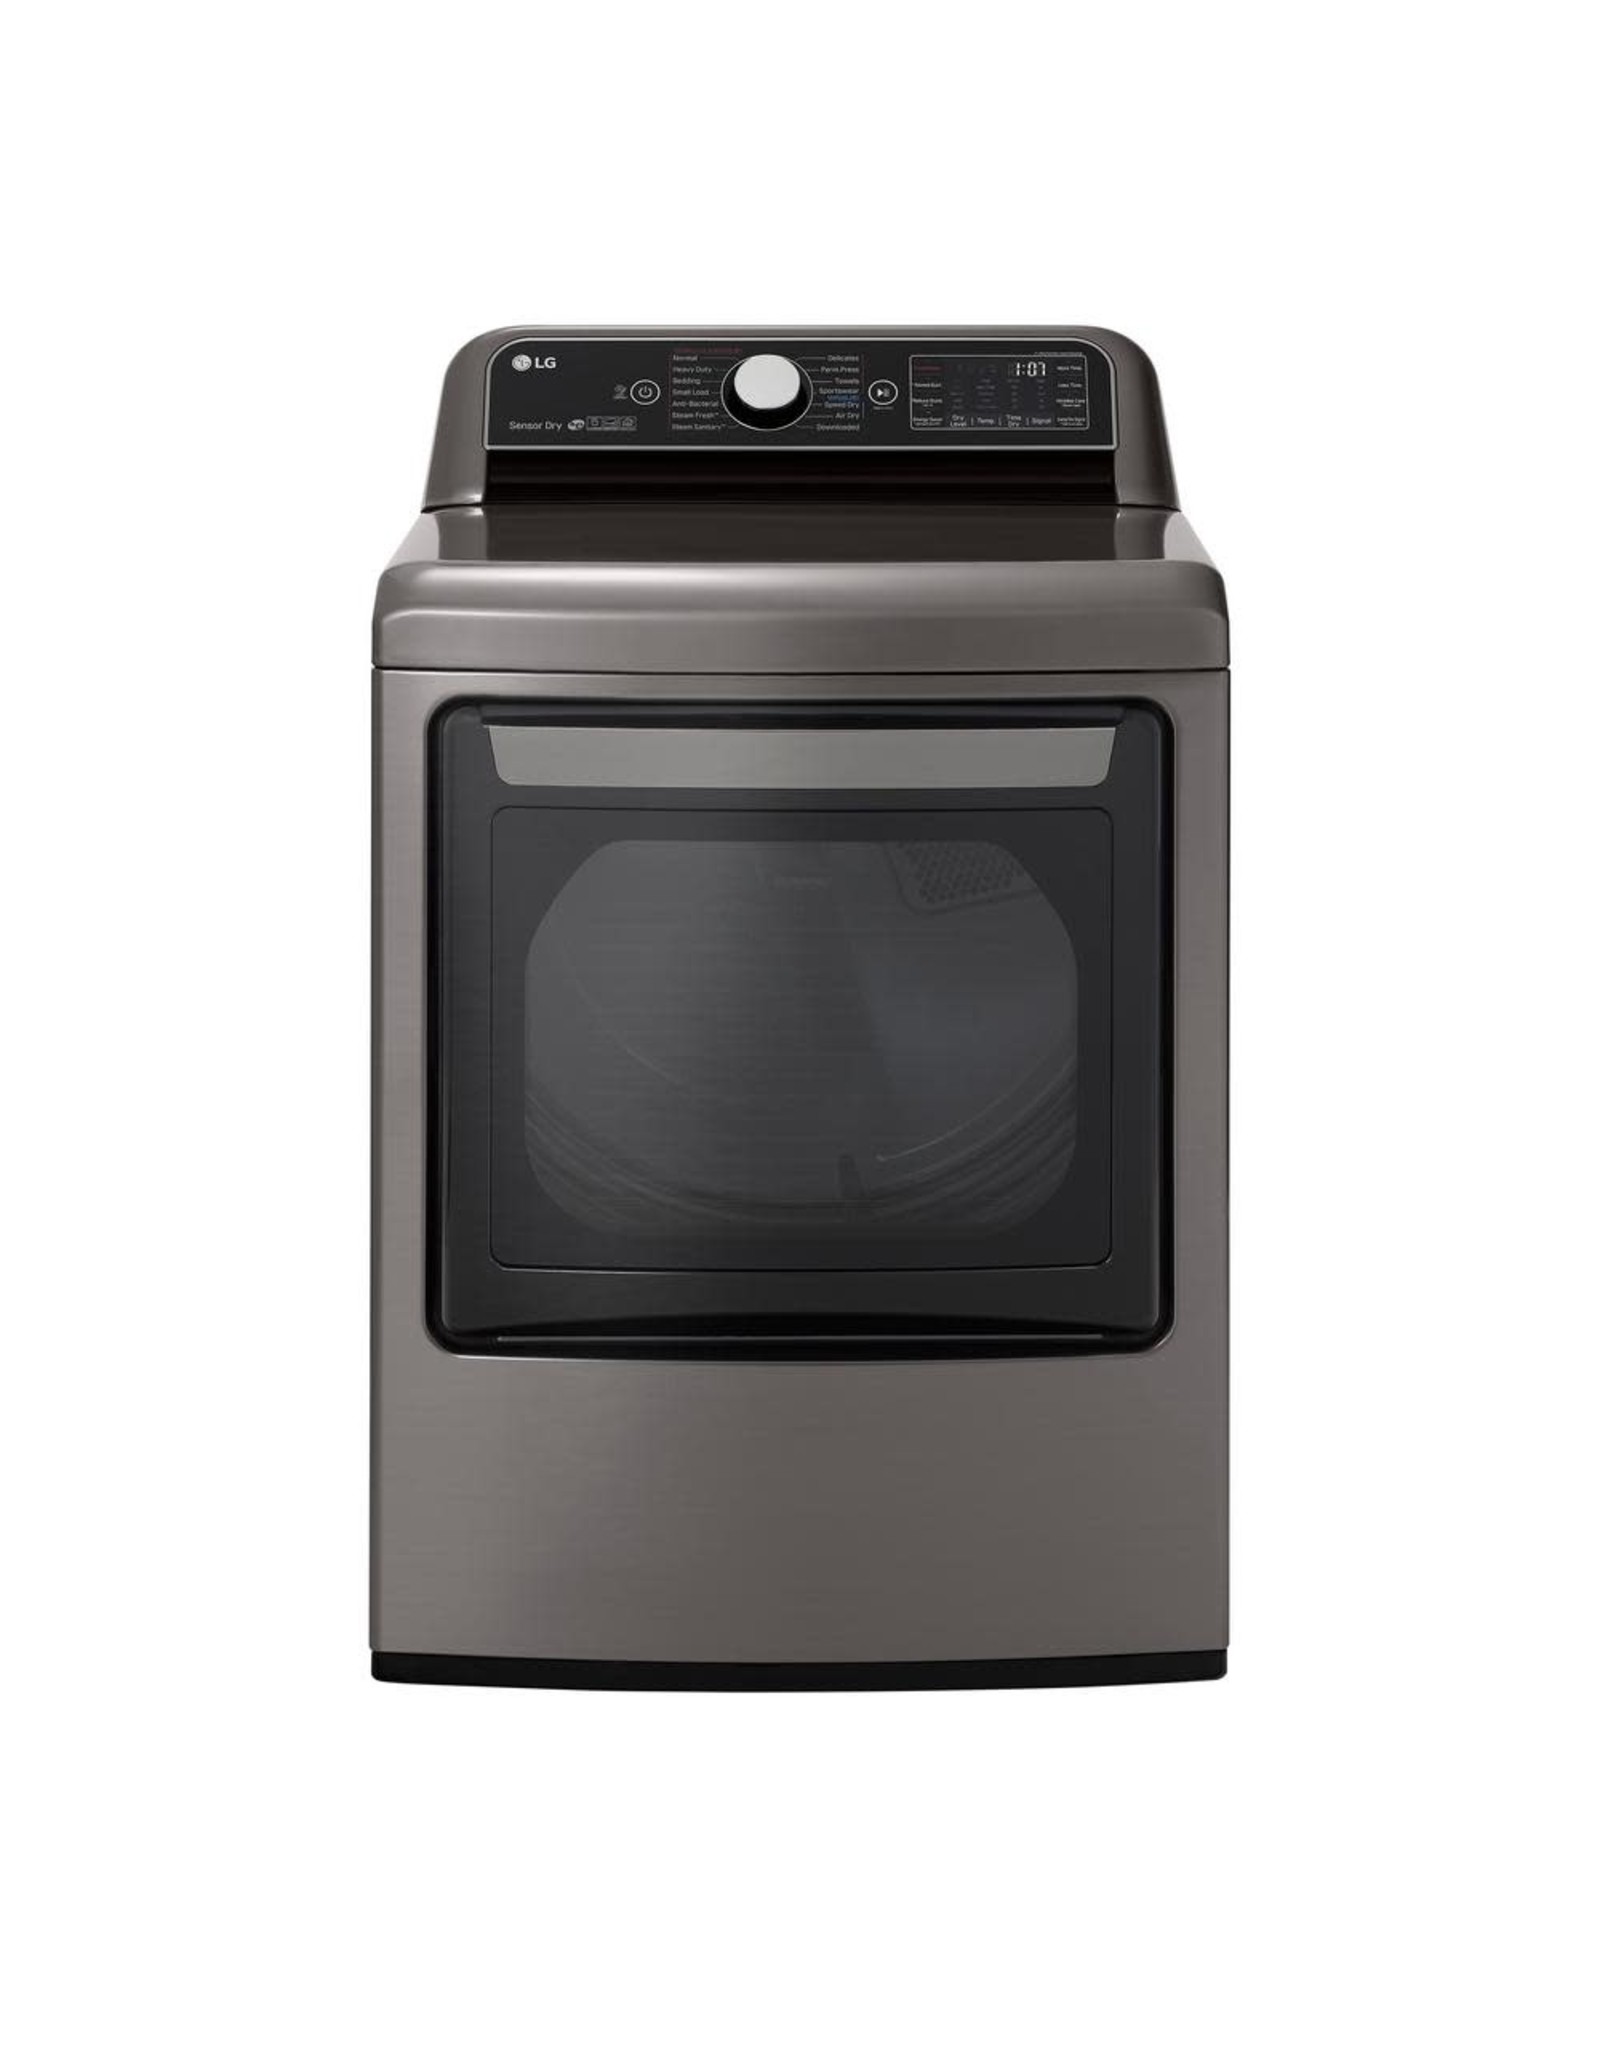 DLEX7800VE 7.3 cu. ft. Ultra Large Smart Front Load Electric Dryer w/ EasyLoad Door, TurboSteam & Wi-Fi Enabled in Graphite Steel